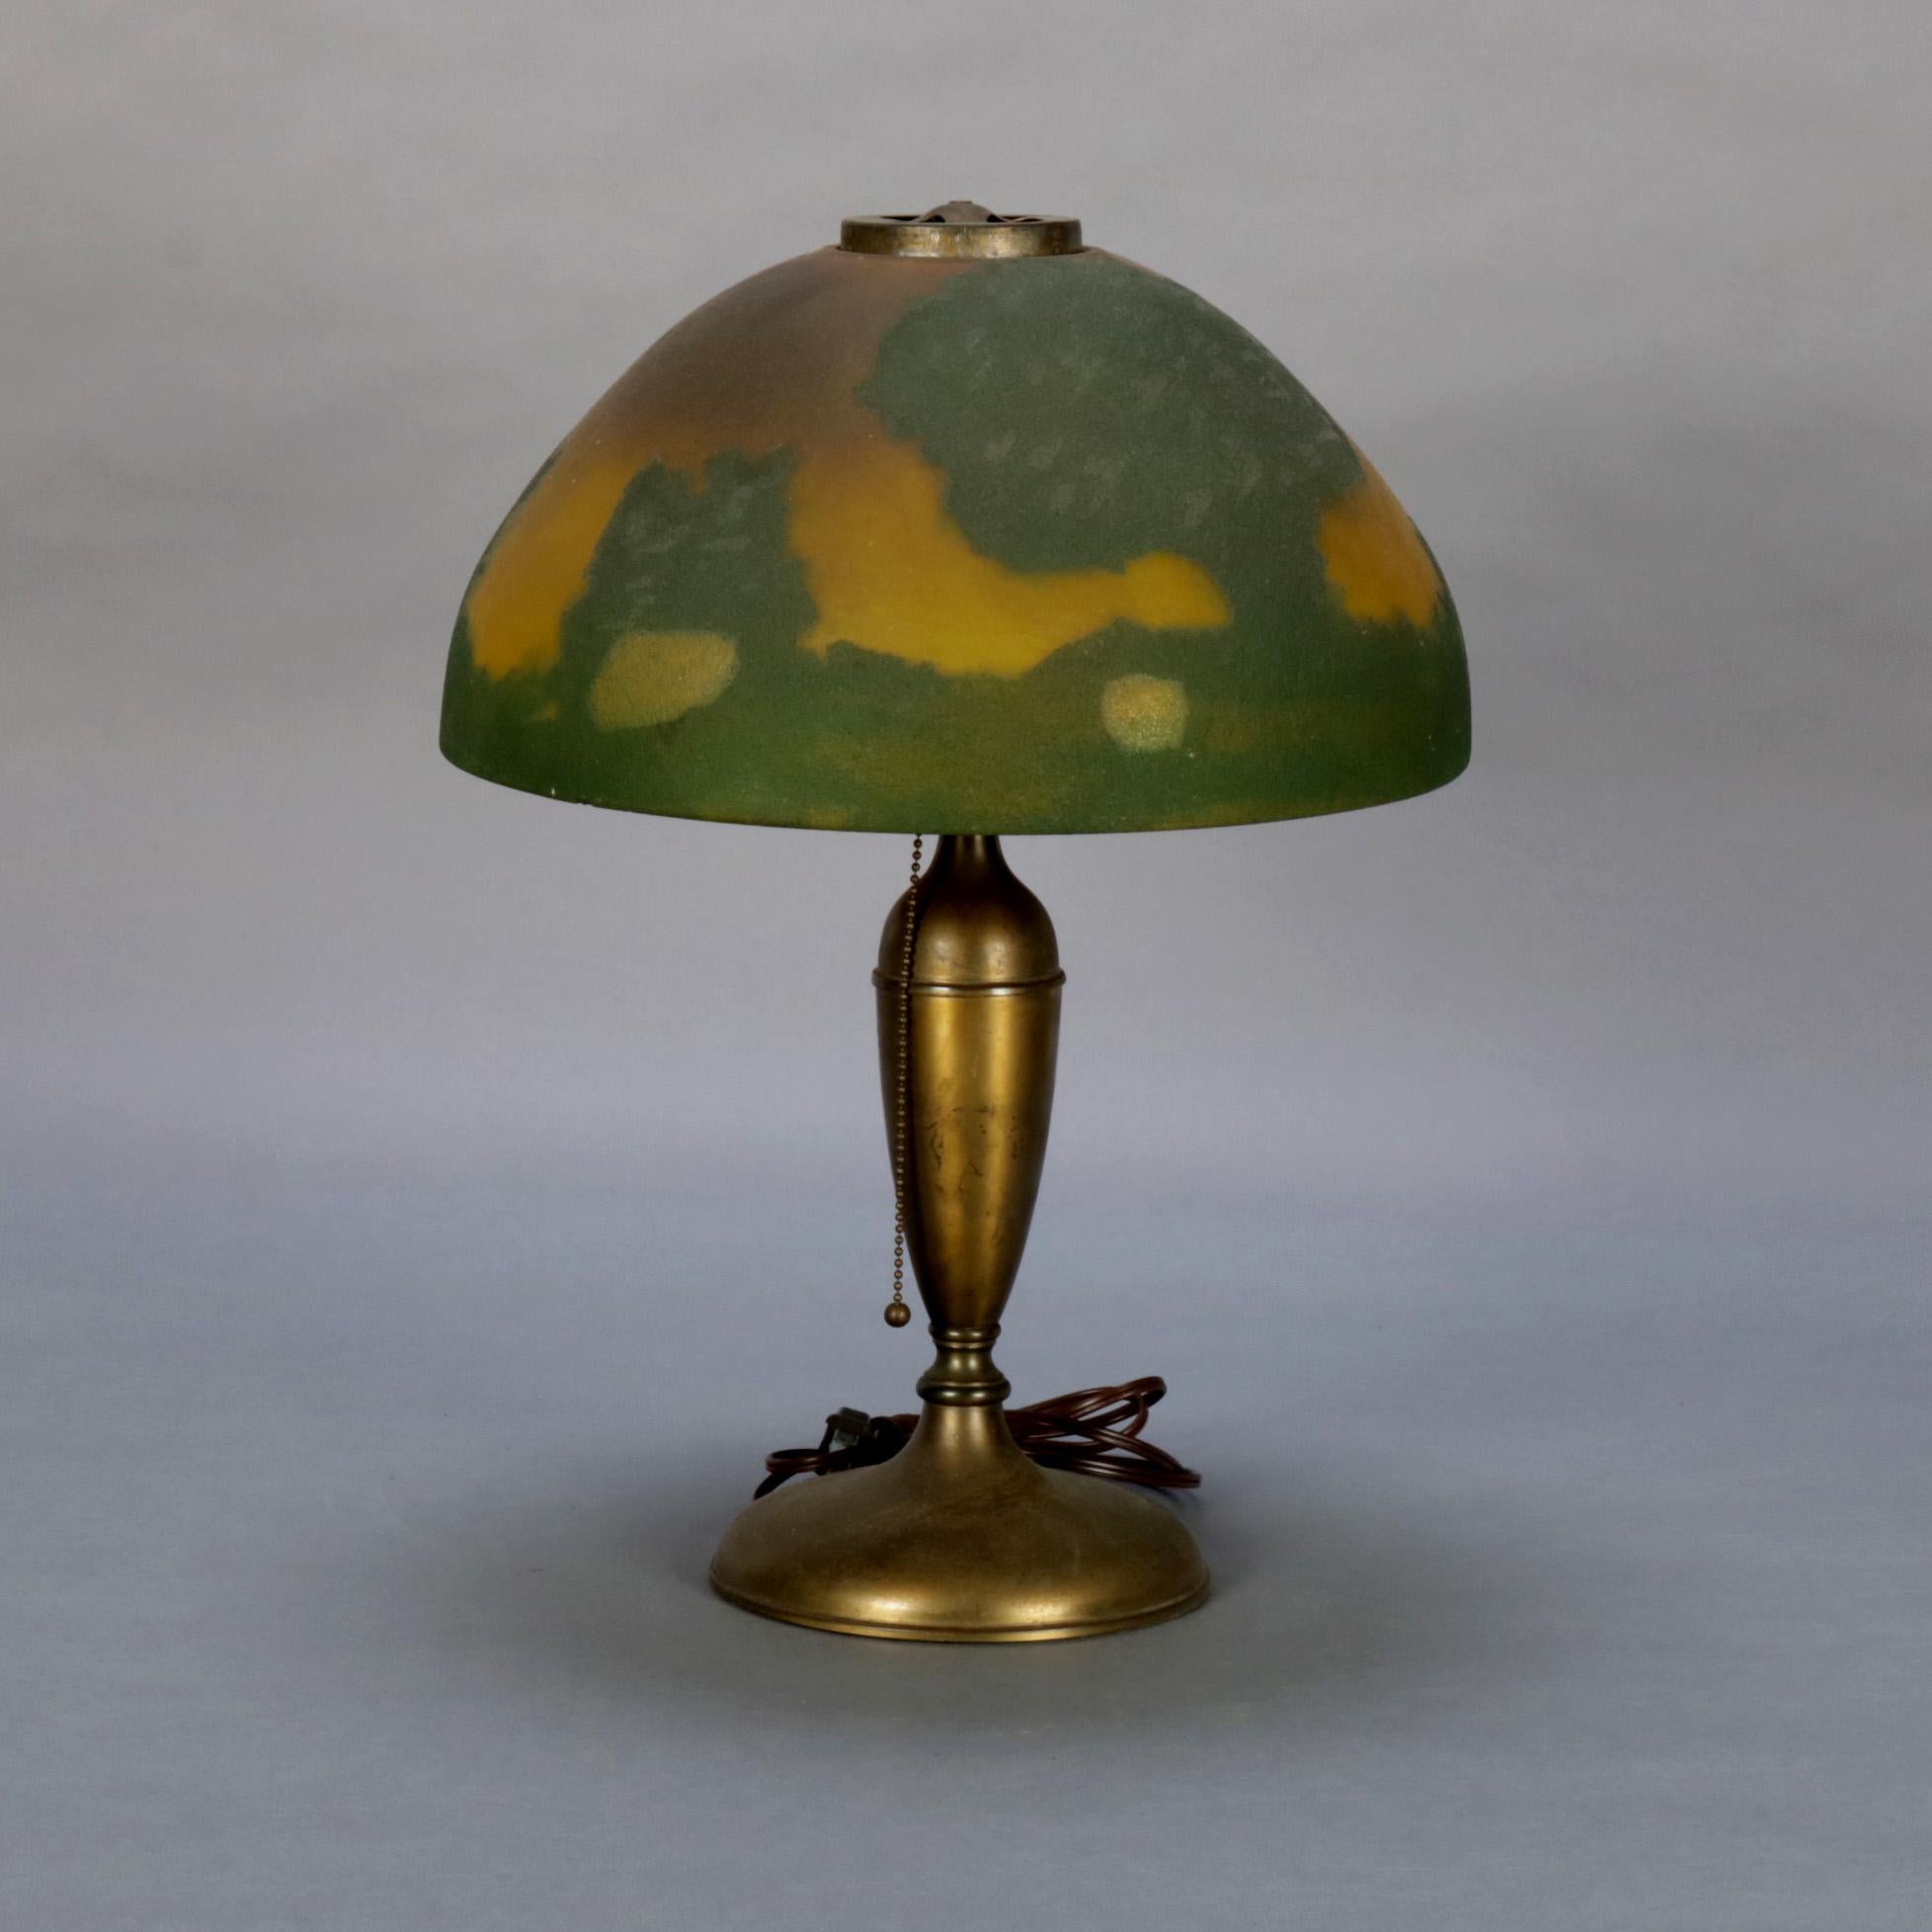 An antique arts and crafts Jefferson table lamp features single socket and urn form base with scenic landscape reverse painted glass dome shade, working and with professional rewiring, circa 1910.

Measures: 18.5